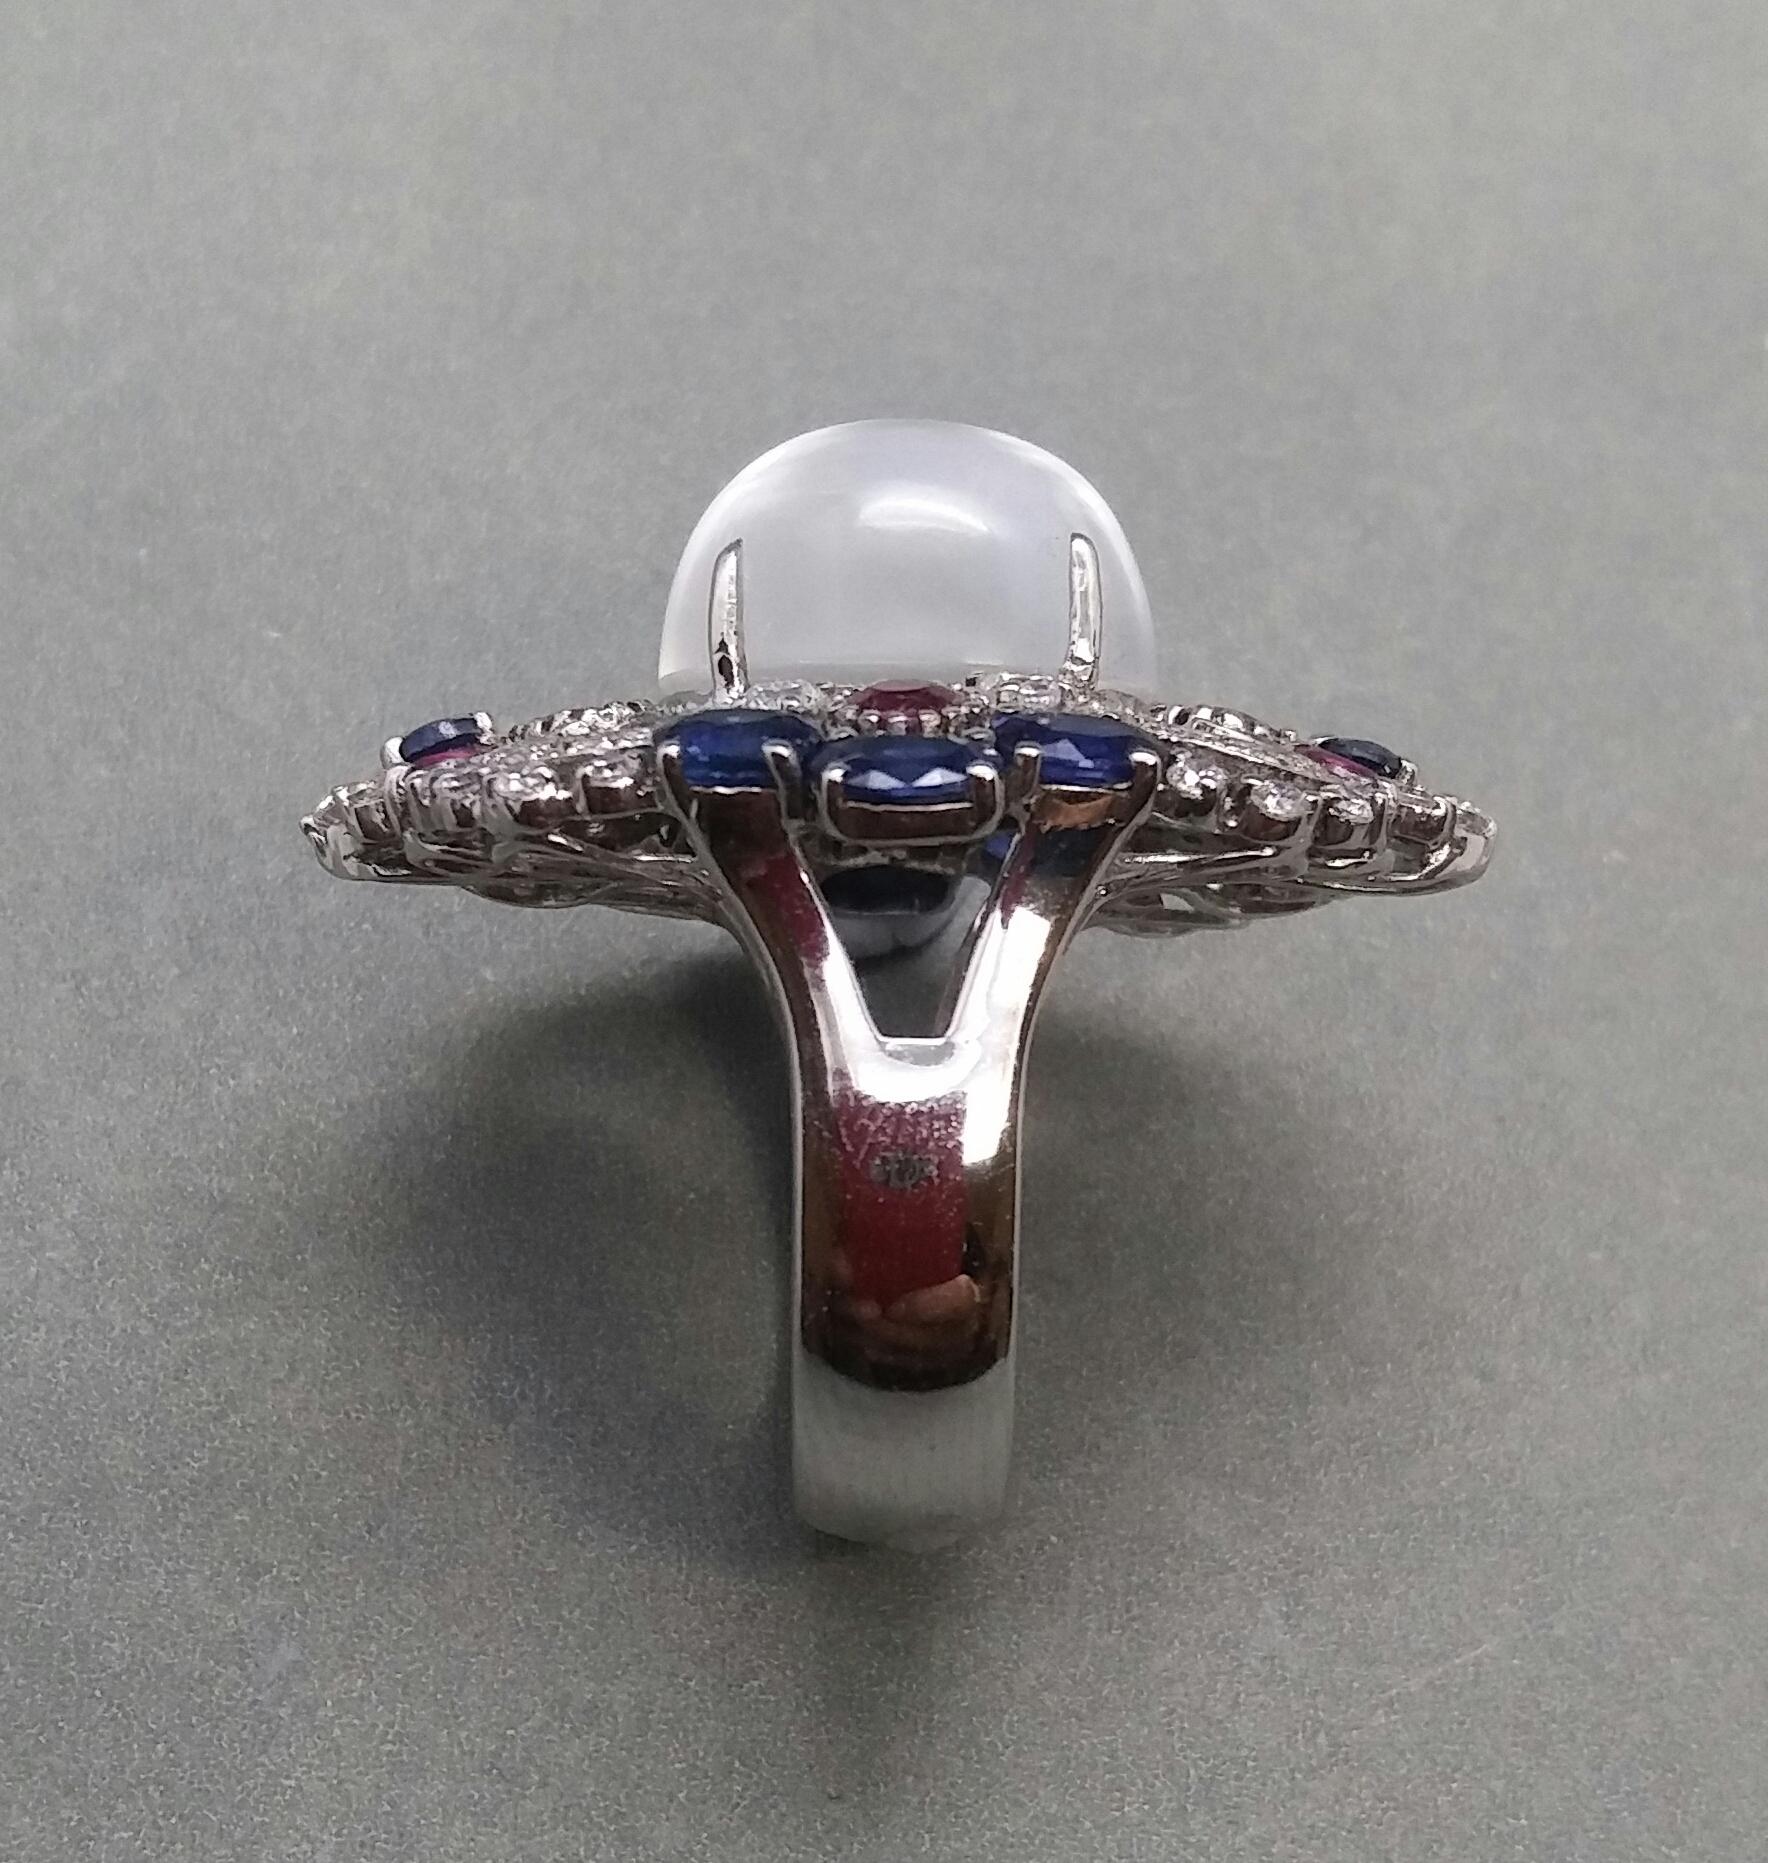 Unique and completely handmade 14 kt white gold ring,with a central Moonstone cabochon measuring 12x14 mm,surrounded by 4 mm round faceted rubies of 4 mm diameter,8 mm oval blue sapphires of 3x4 mm,4 small faceted round rubies of 2,5 mm. and 1.5